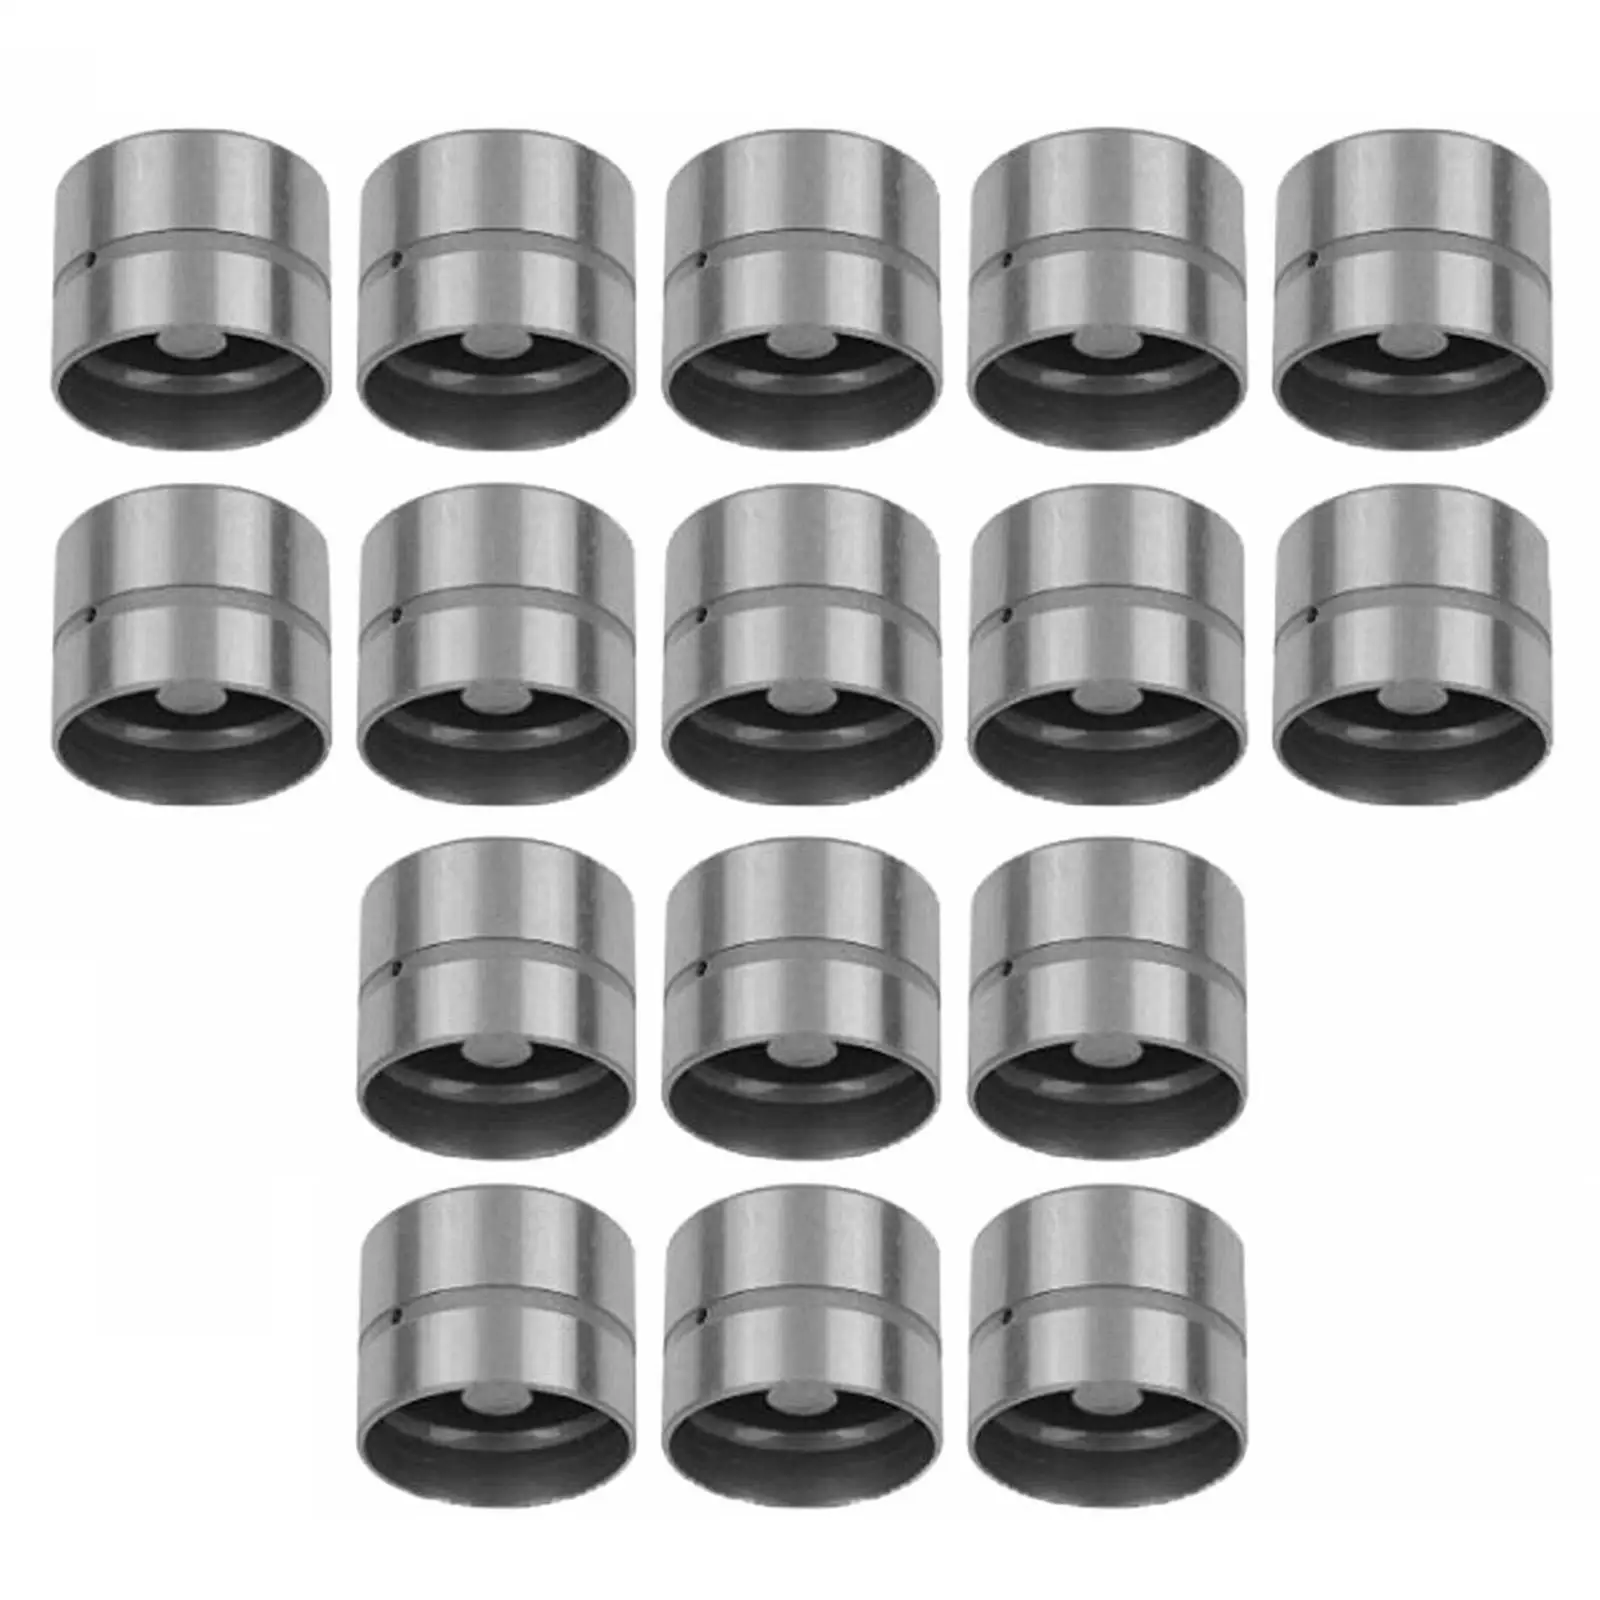 16x Hydraulic Lifters Tappets Accessories Valves Parts Repair for 20XE C20XE C20Let x20Xev 420011810 90570967 85000600